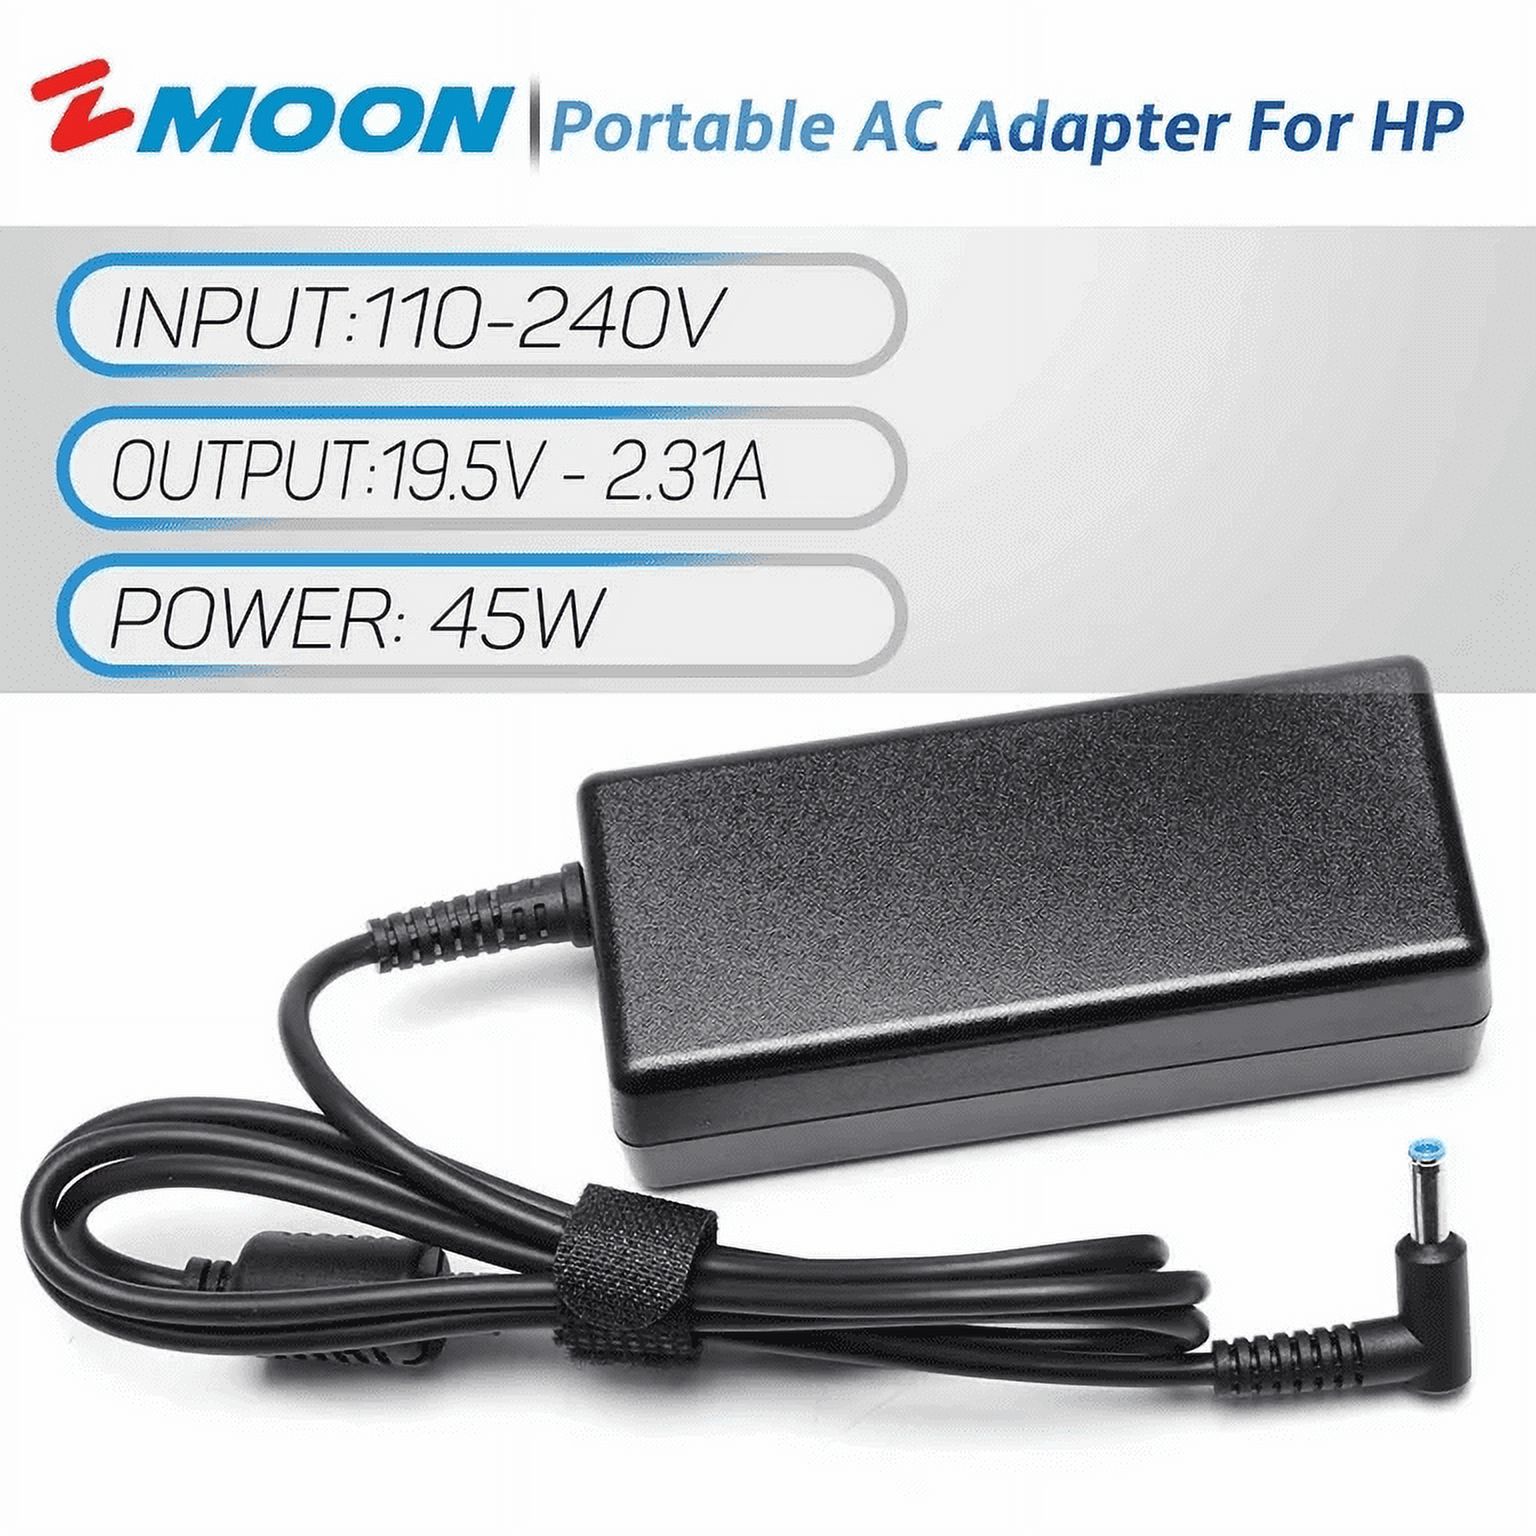 19.5V 2.31A 45W AC Power Laptop Adapter Supply Charger Cord for HP pavilion X360 M3 11 13 15 Folio 1040 G1 G2 G3 HSTNN-CA40 7400015-001 740015-003 - image 2 of 6